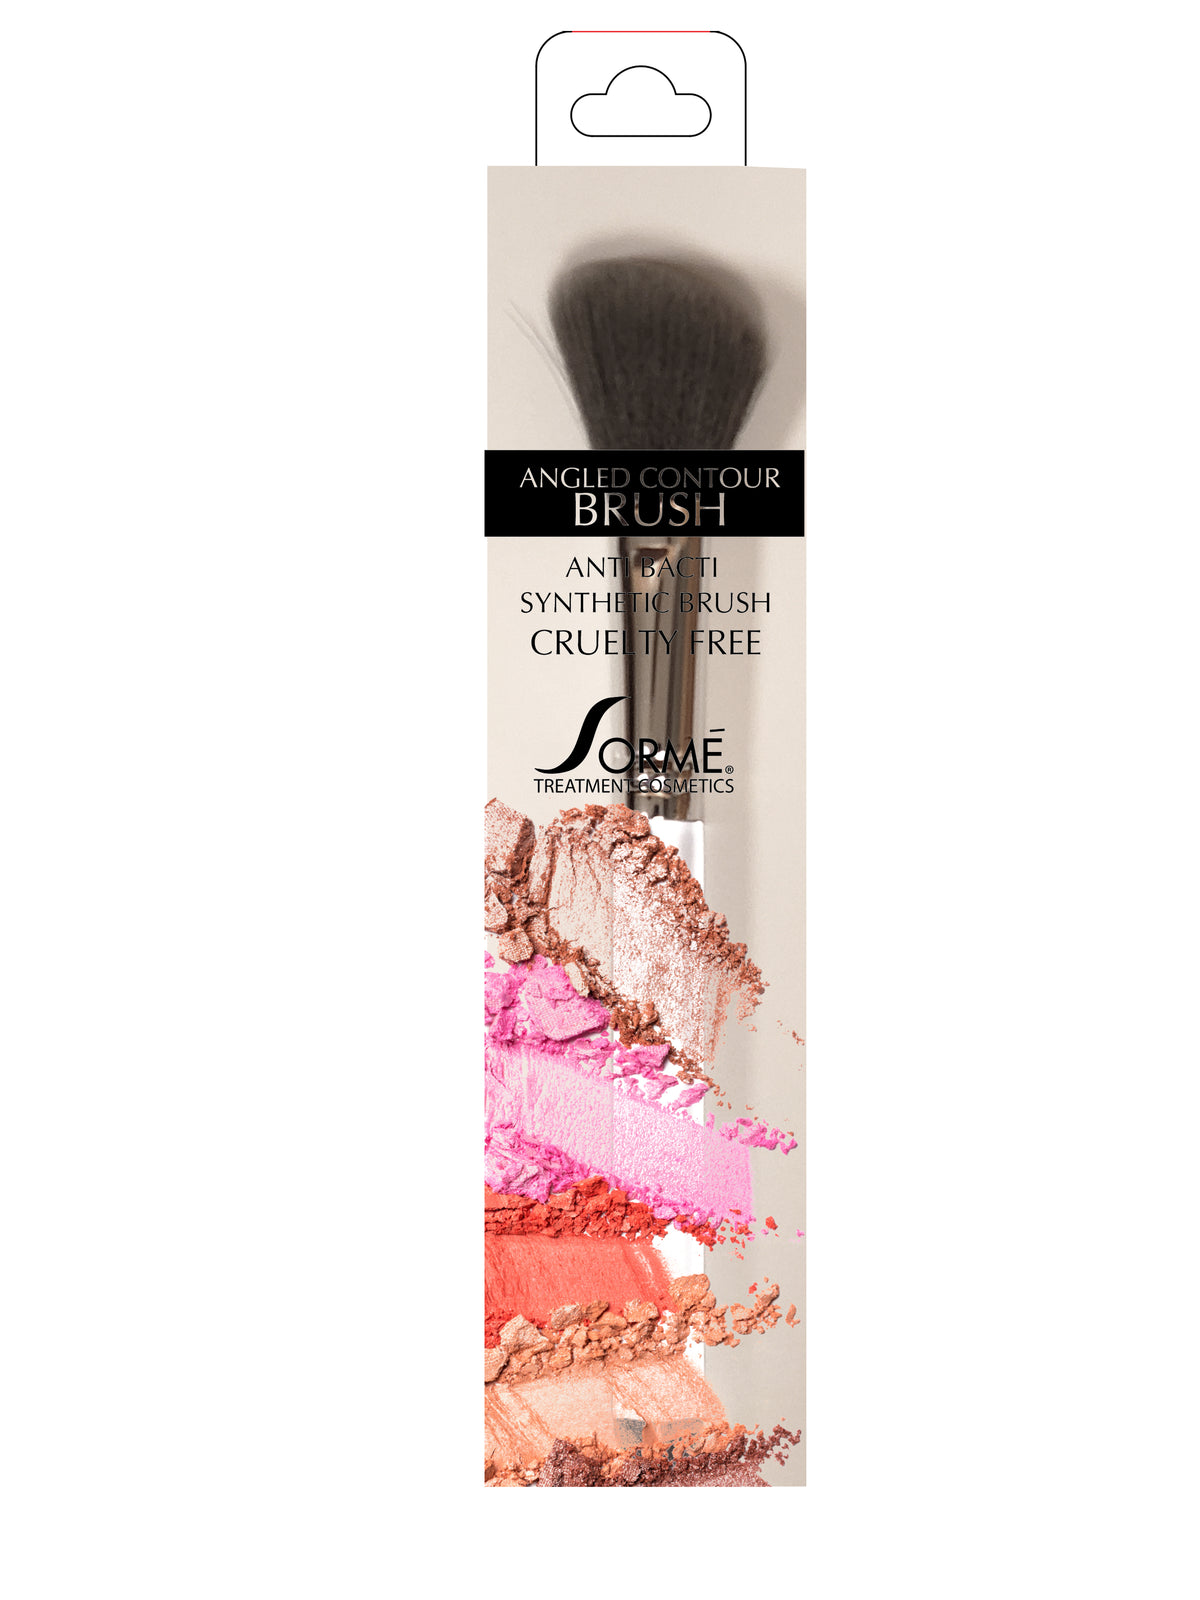 Sorme new brushes and brush sets (natural and synthetic brushes)